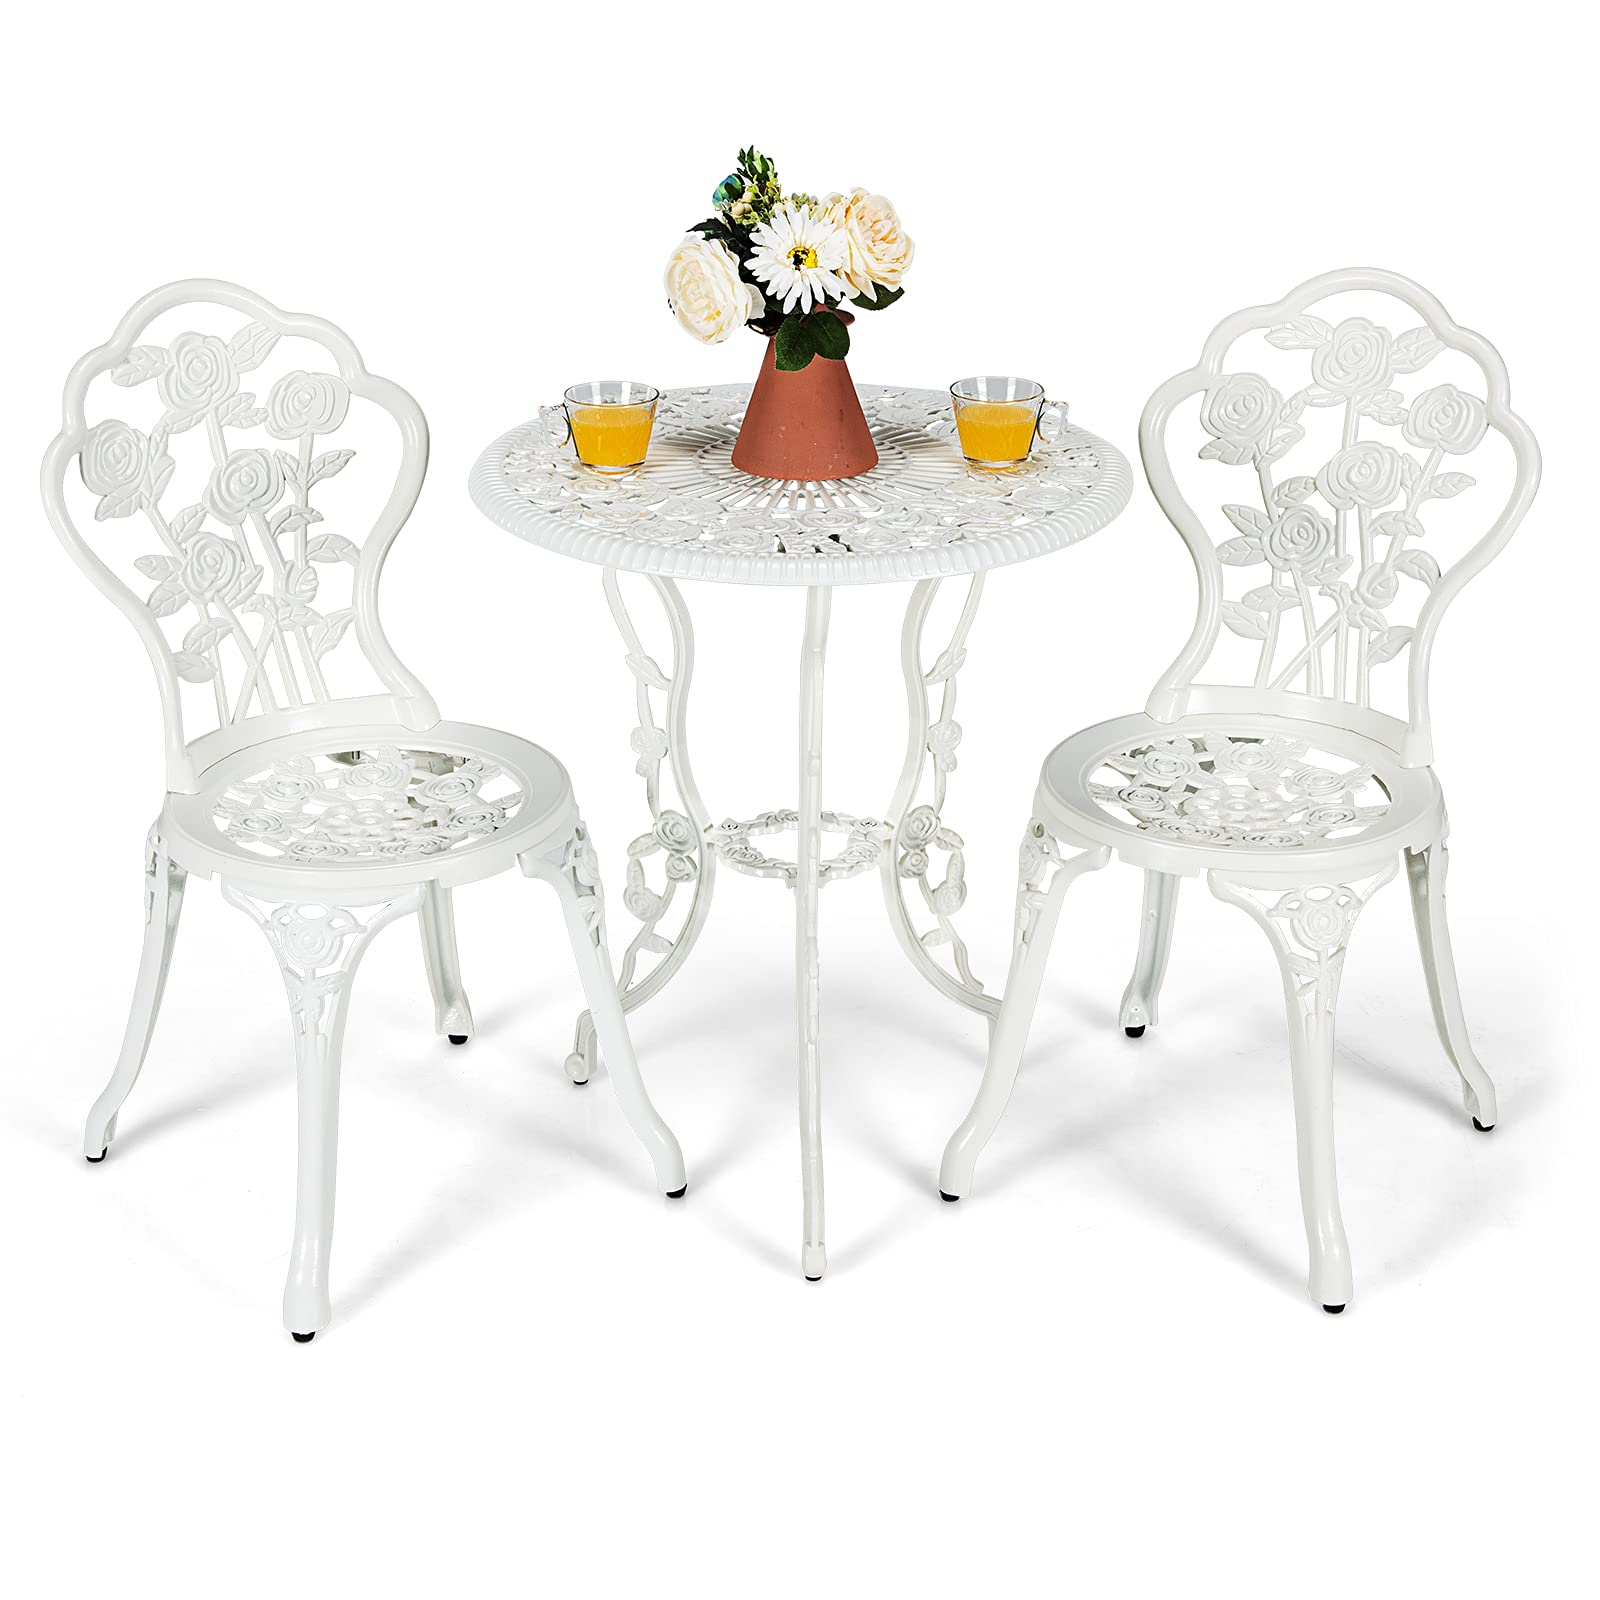 Giantex 3 Piece Bistro Set, Cast Aluminum Porch Furniture, Outdoor Patio Dining Table and Chairs with Umbrella Hole